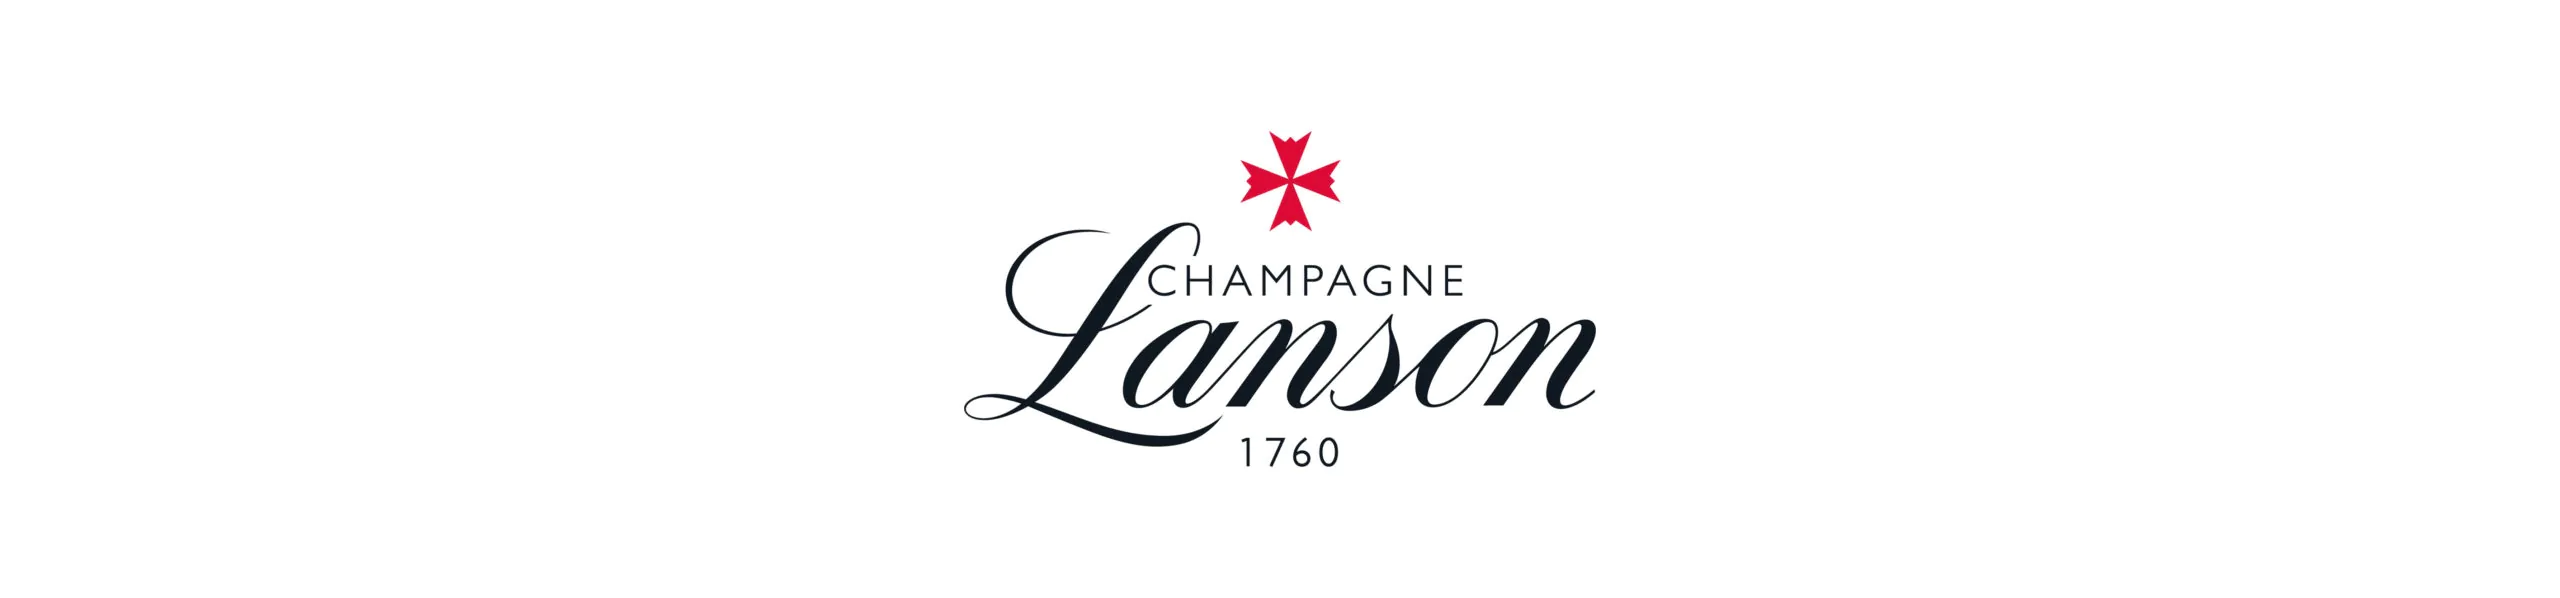 Lanson, It's All About Love